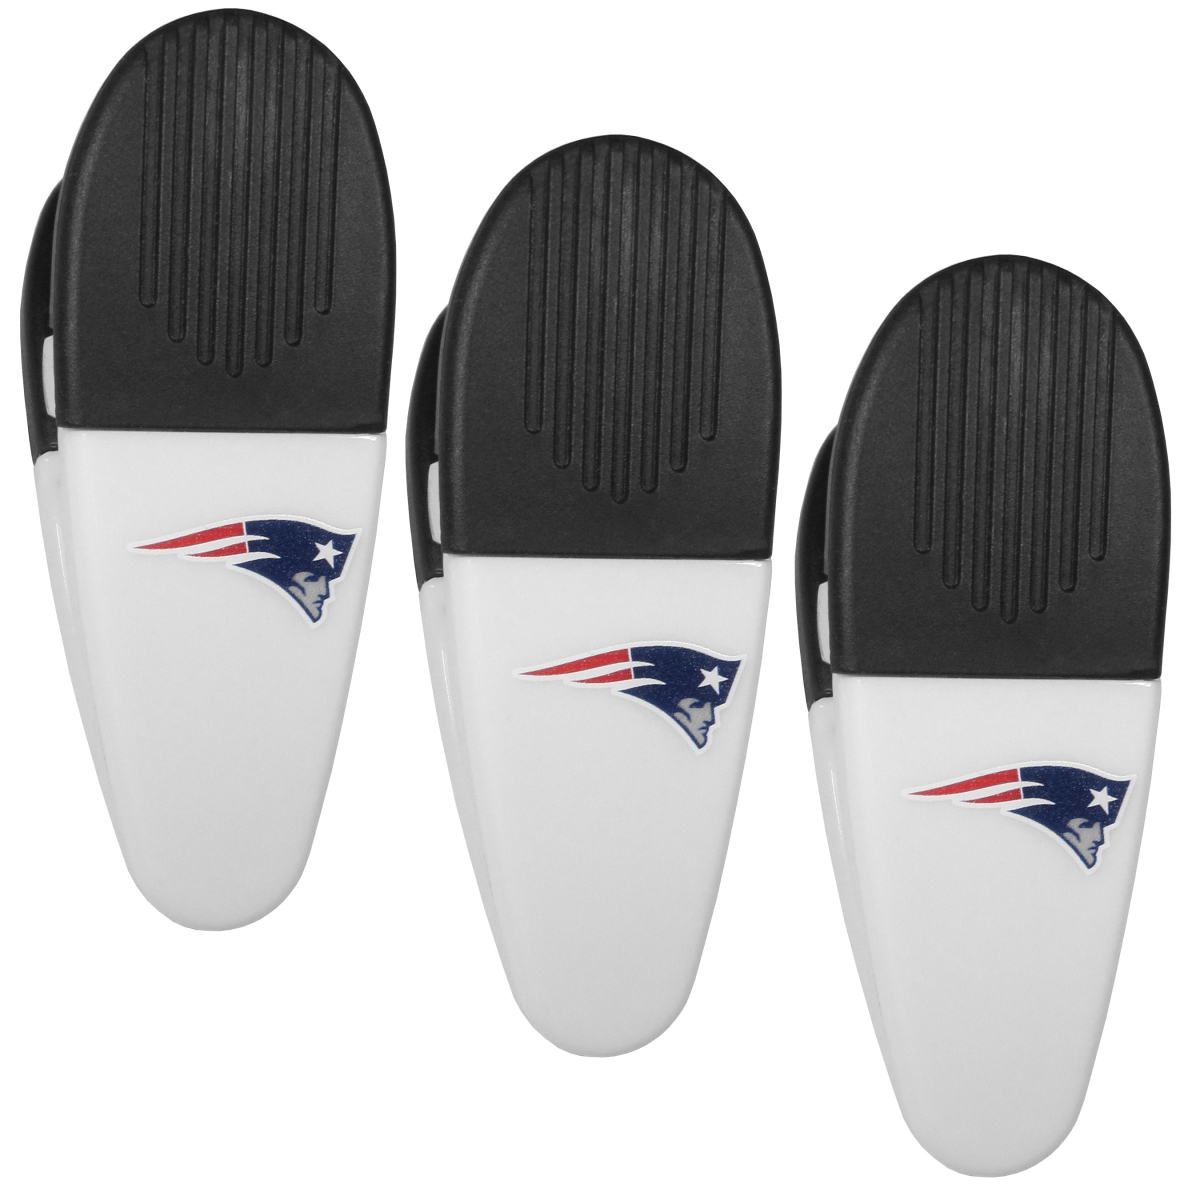 Picture of Siskiyou F3CM120 Unisex NFL New England Patriots Mini Chip Clip Magnets - Pack of 3